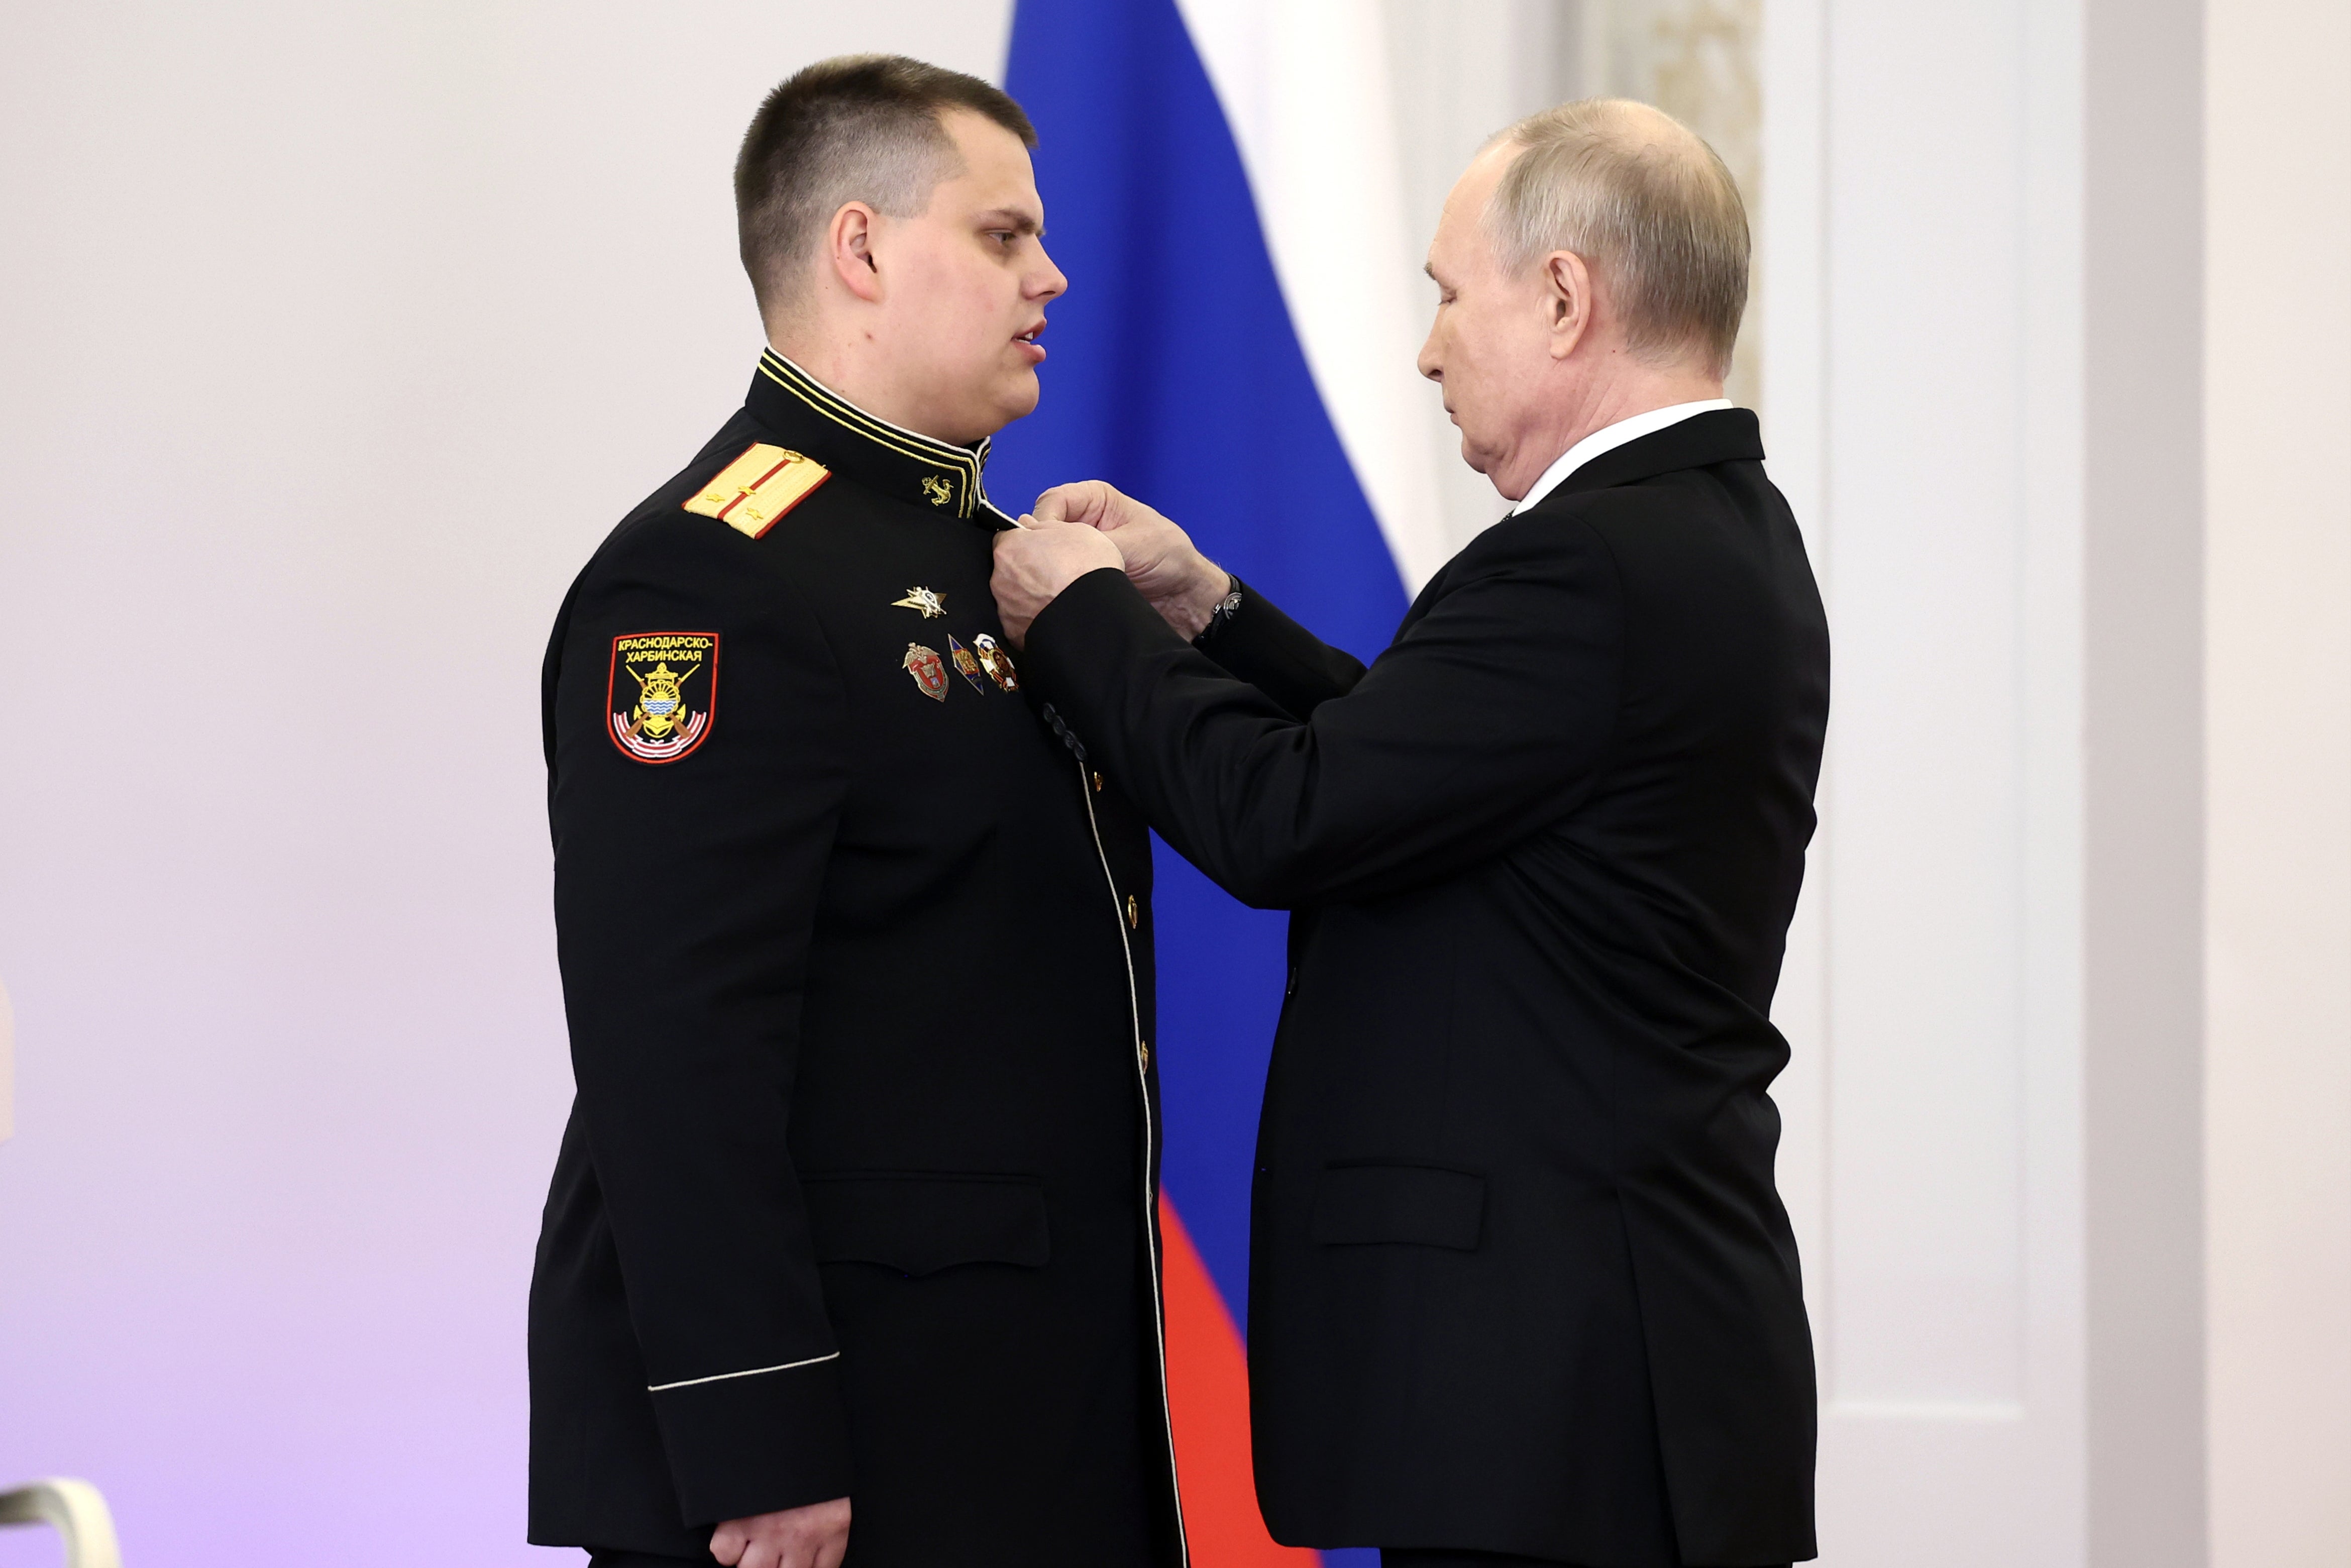 Vladimir Putin (R) announced his intention to run for a fifth presidential term during a stage-managed awards ceremony with soldiers who had fought in Ukraine